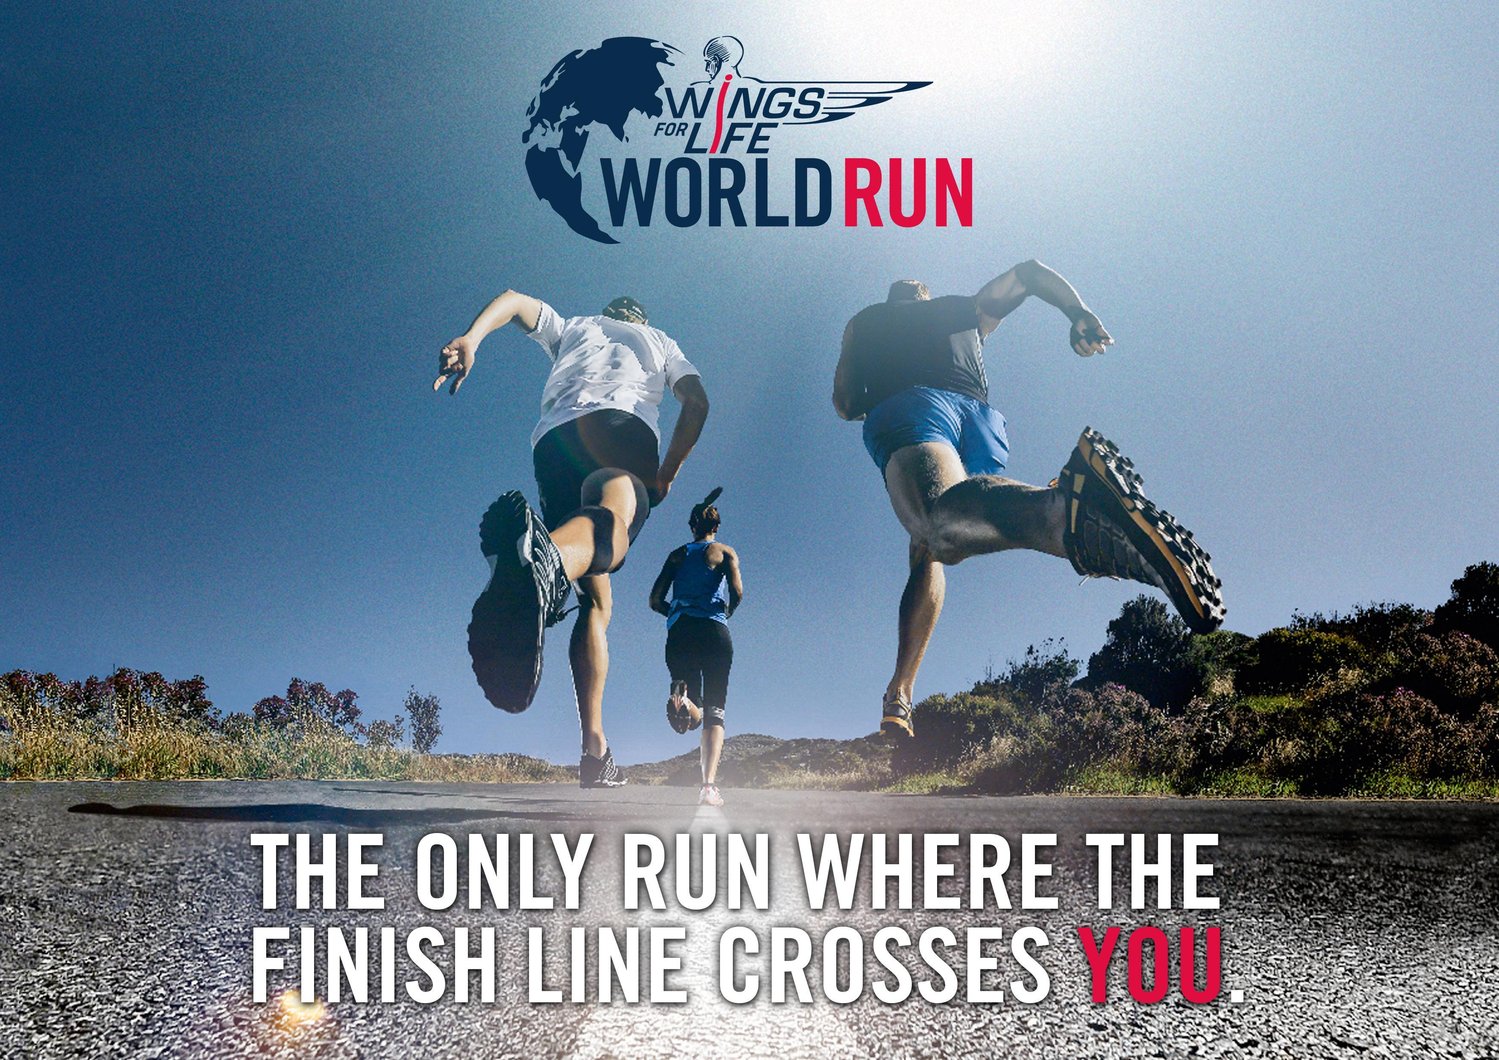 Run 4 life. Wings for Life. Run for Life. «Red bull Wings for Life World Run». Run the World.